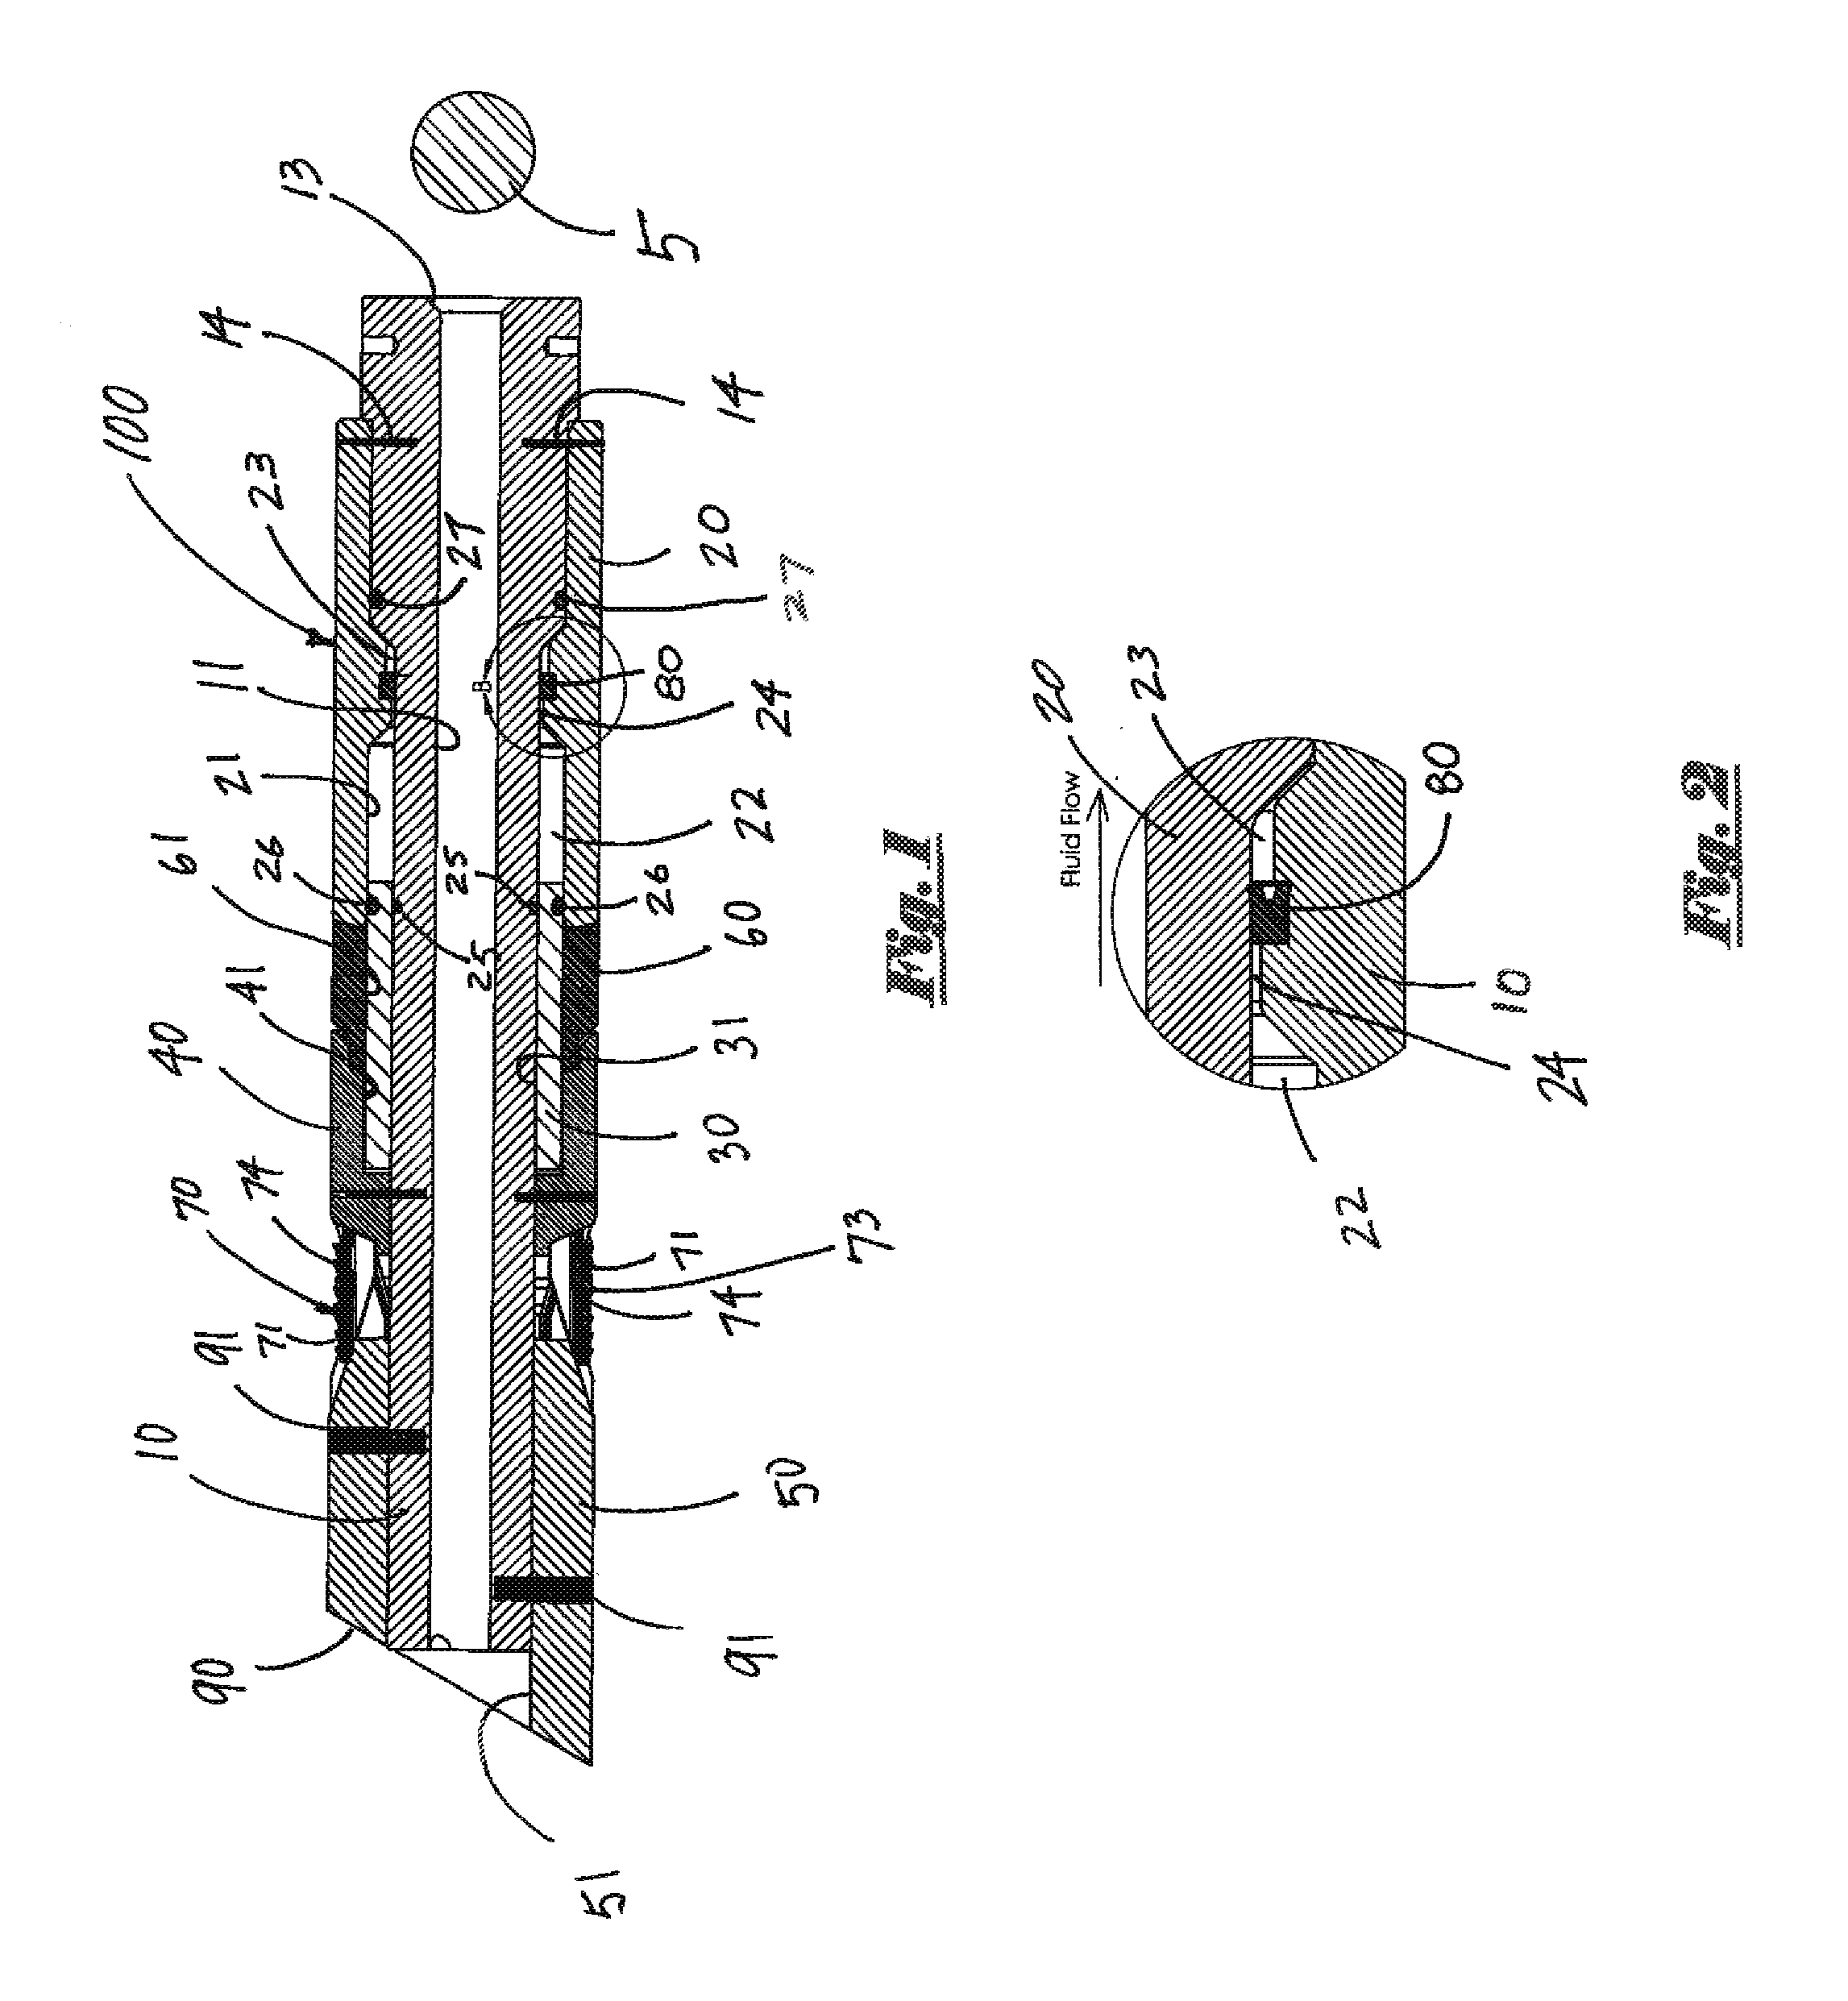 Wellbore composite plug assembly